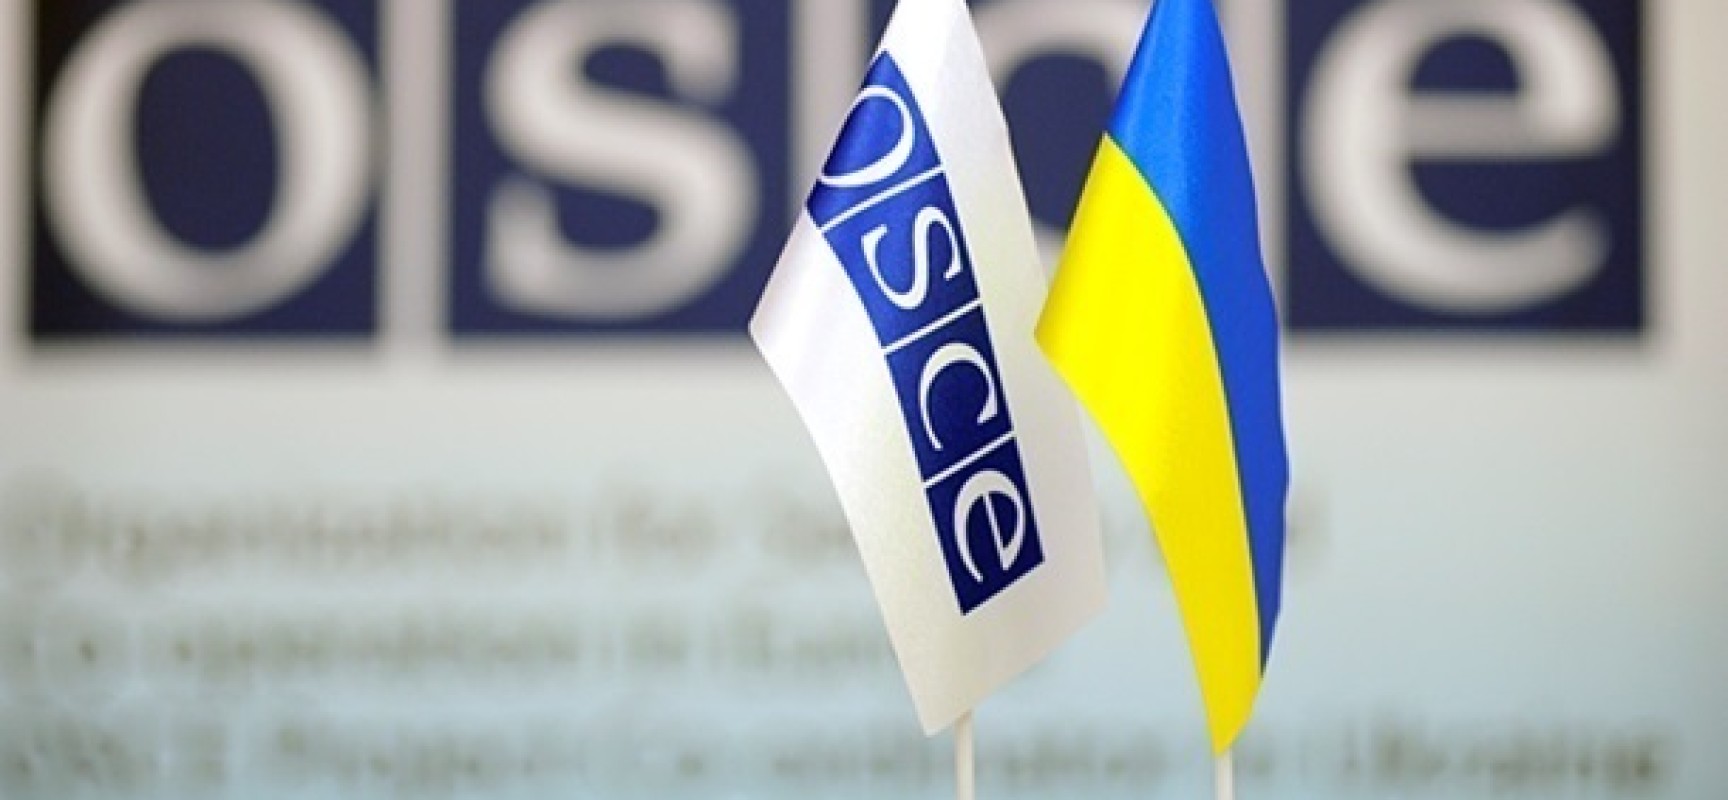 Media briefing on OSCE Special Monitoring Mission to Ukraine